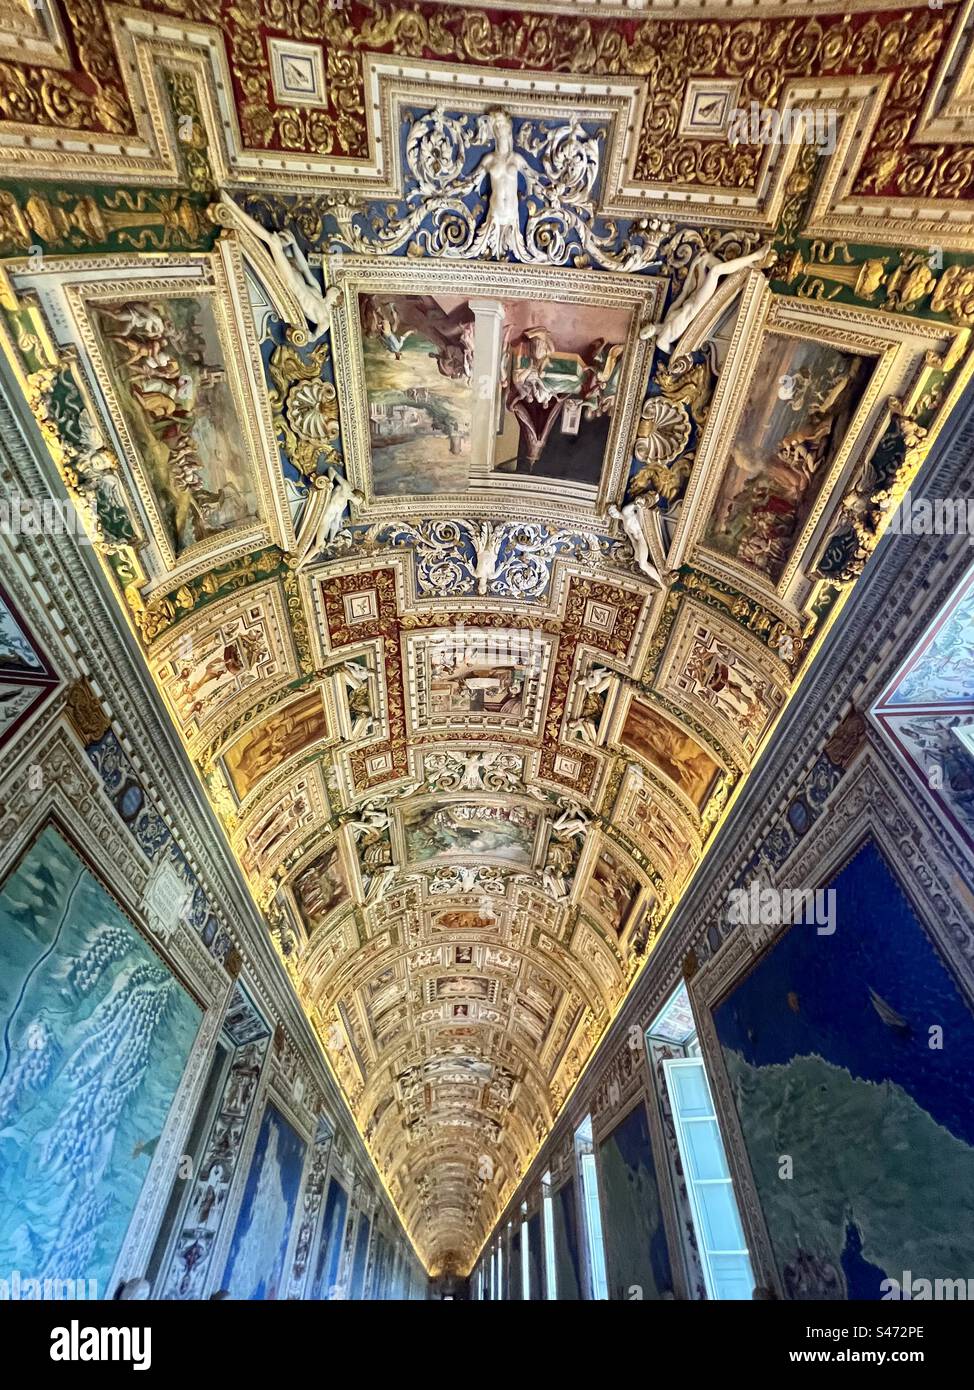 Amazing frescoe ceiling in the gallery of Maps at the Vatican Museum Stock Photo